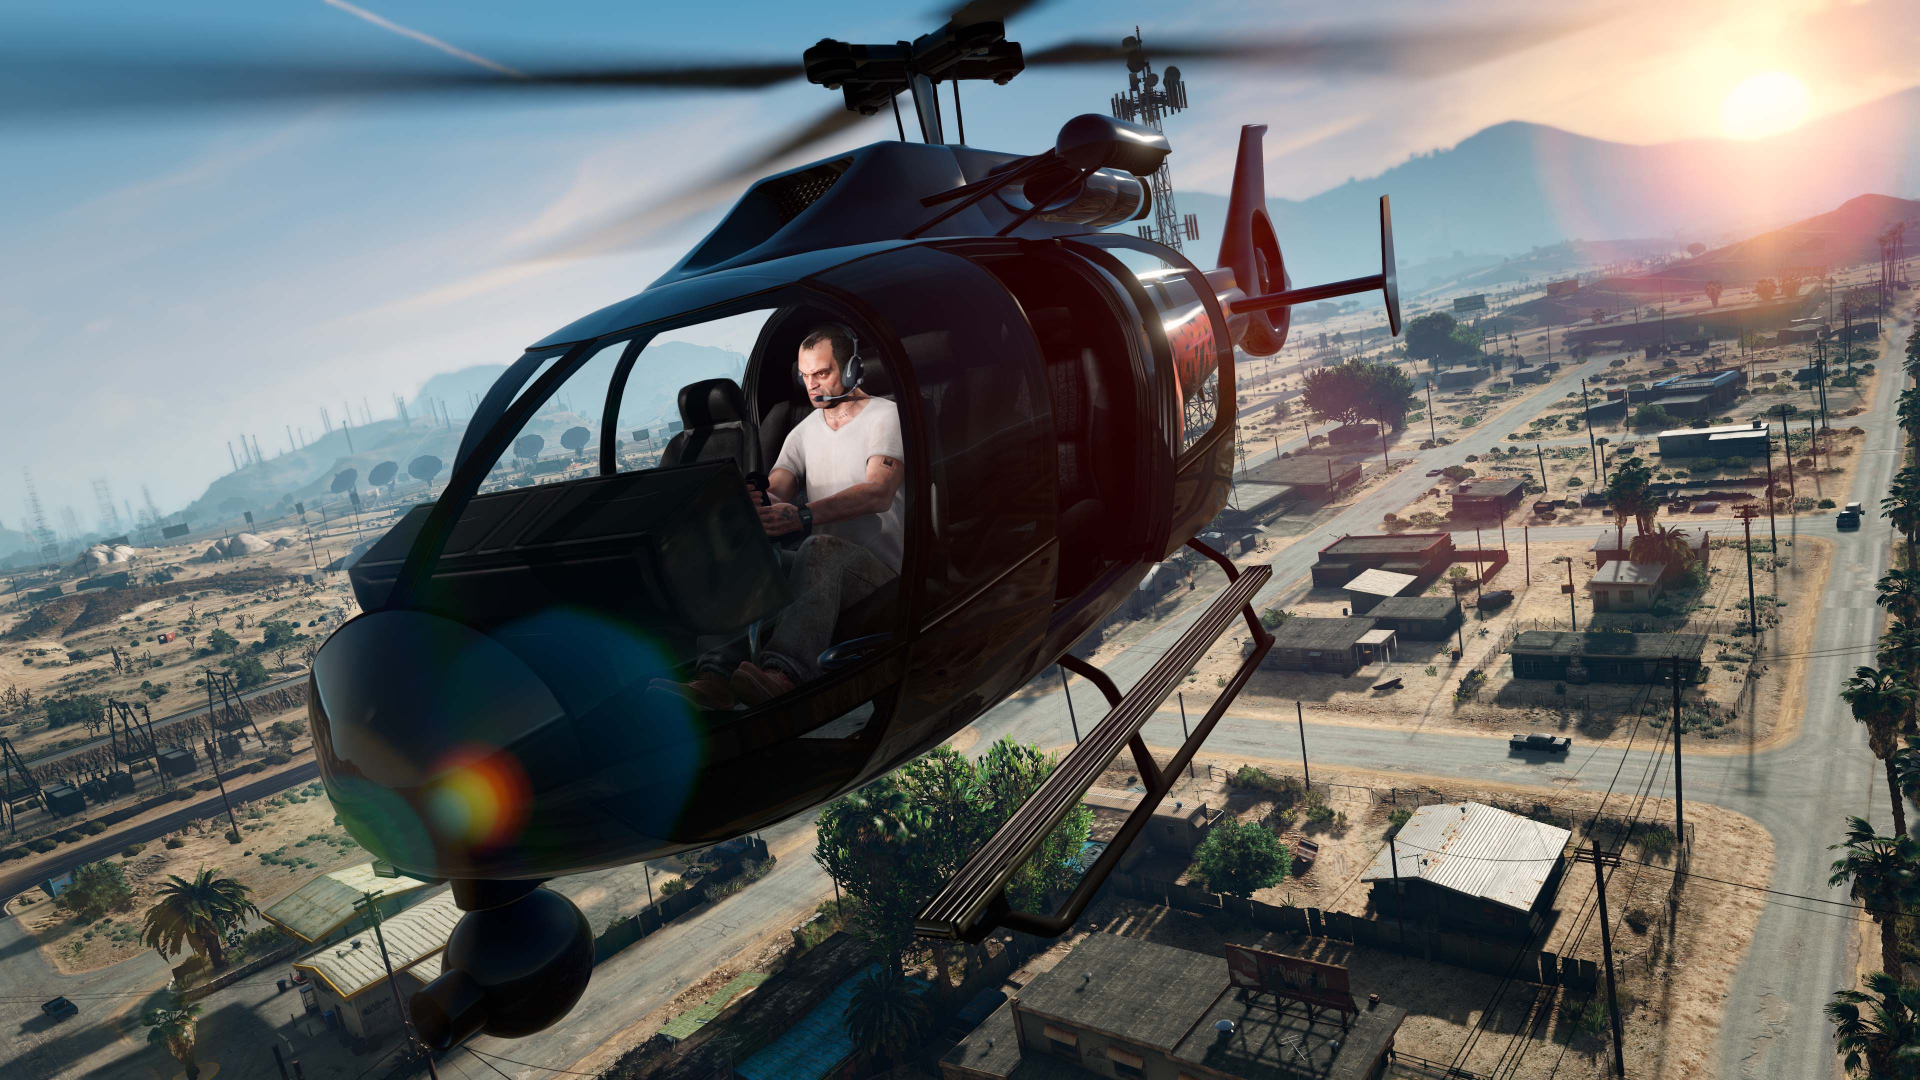 GTA 5 cheats, codes, and phone numbers | PC Gamer